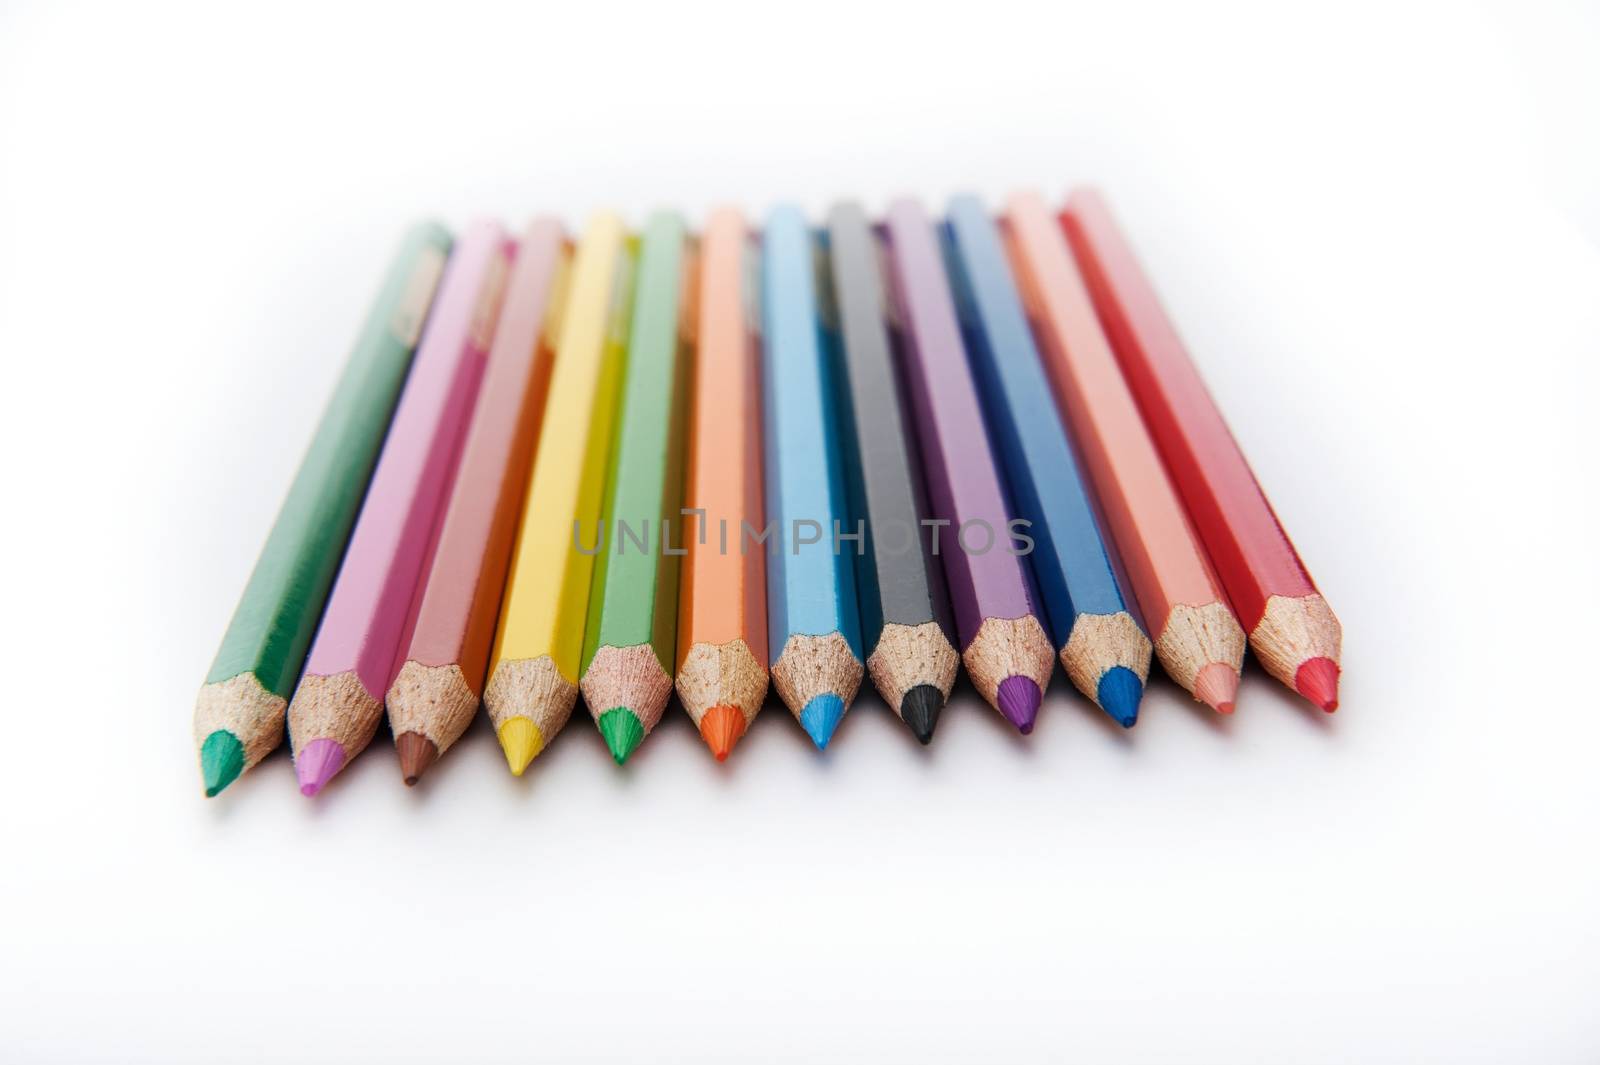 Isolated on the white background horizontal shot of angled set of 12 colored pencils